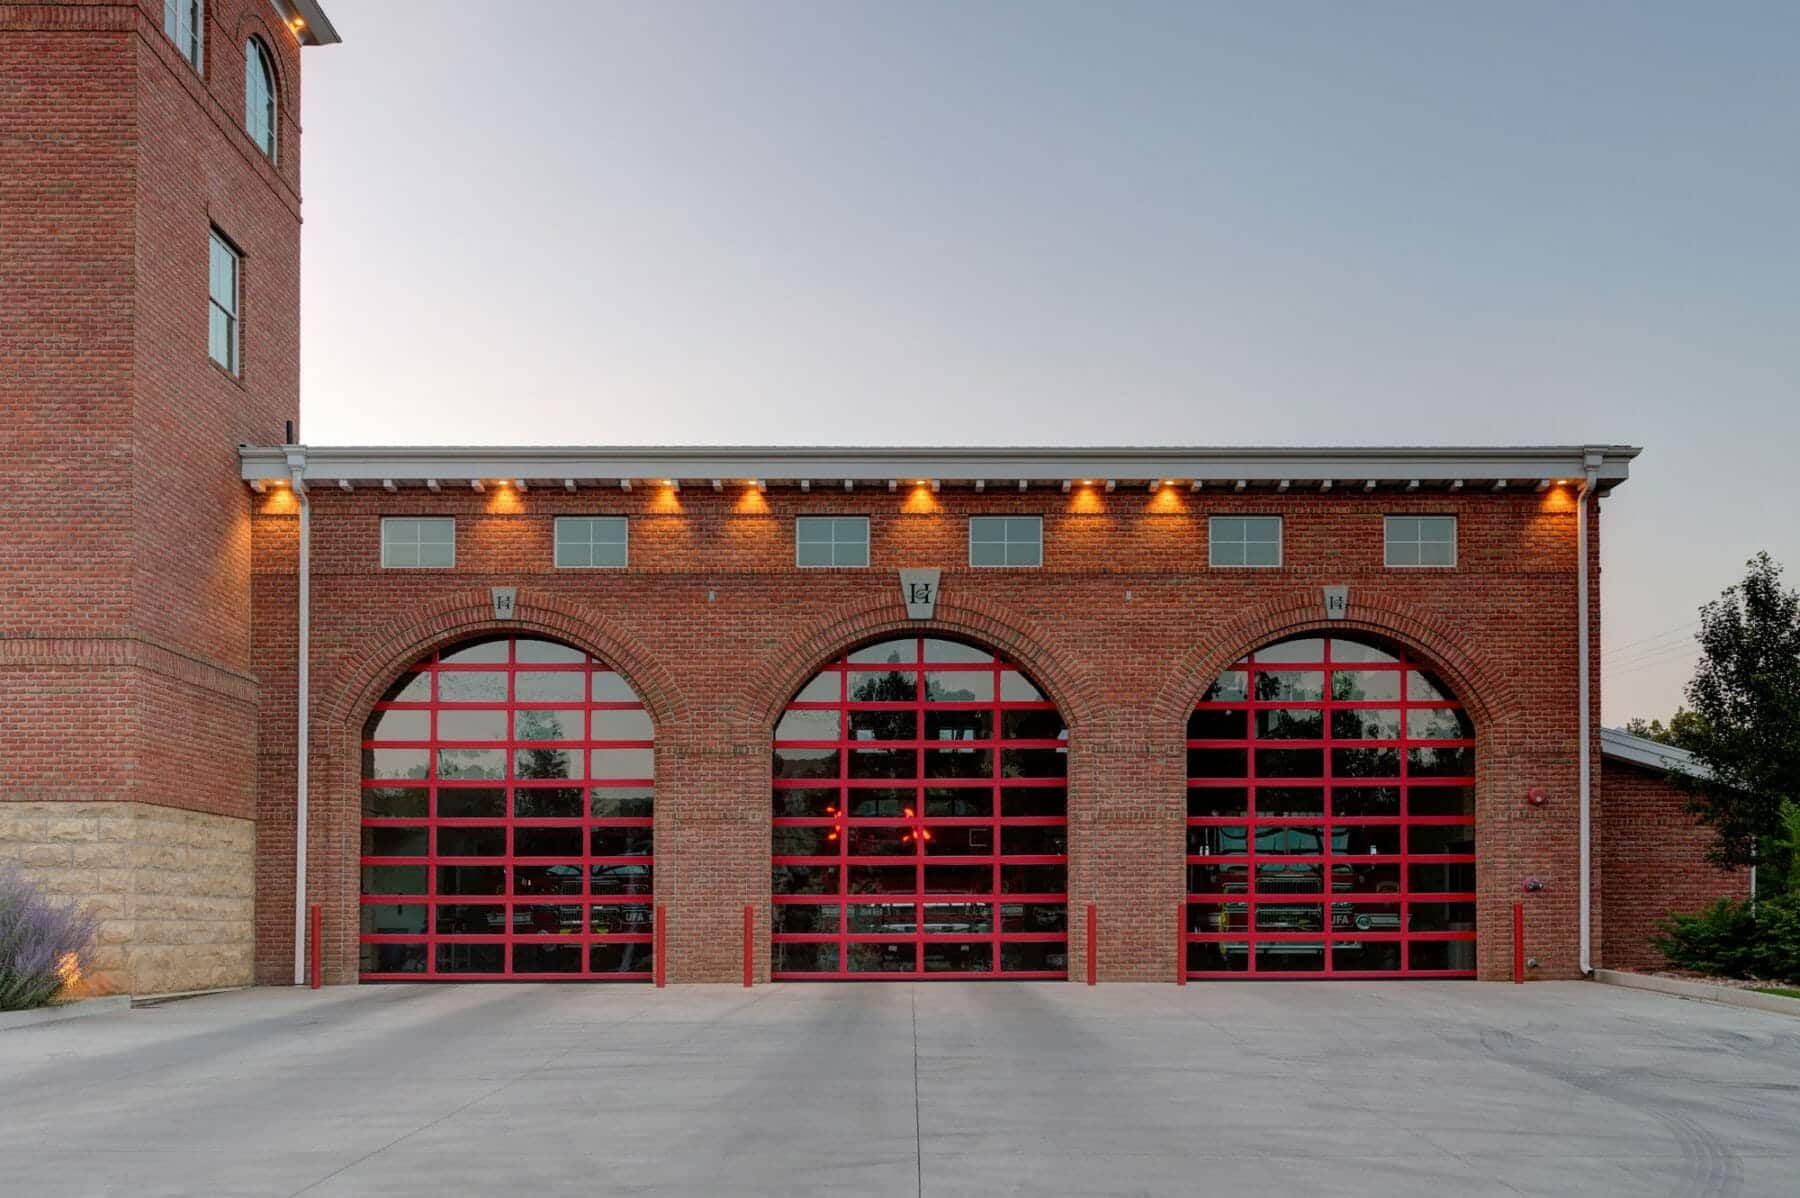 Holladay Fire Station | Utah Municipal Government Building Design | Think Architecture